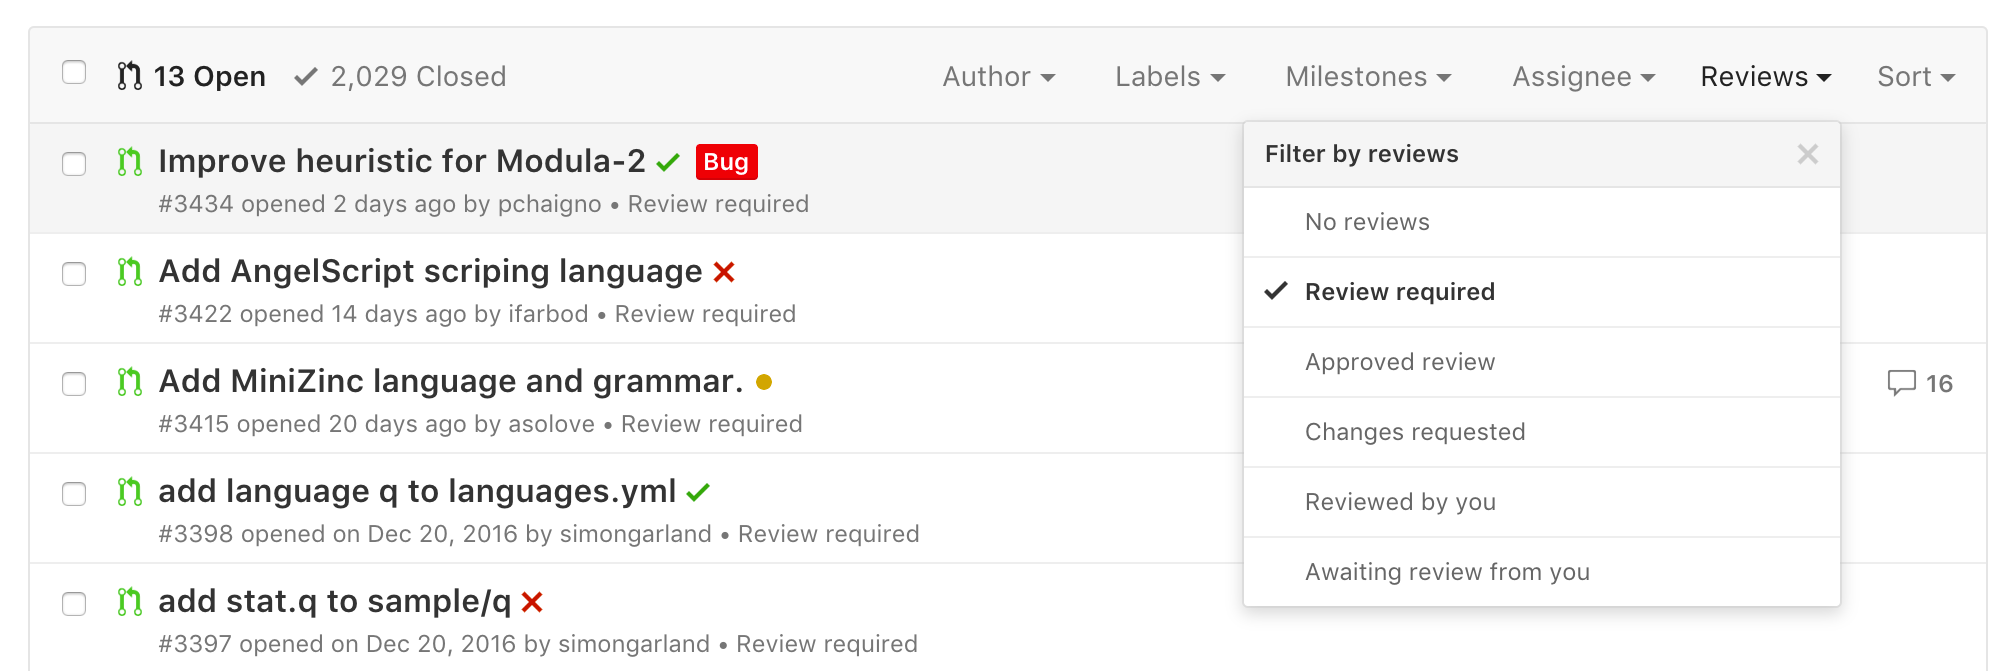 A screenshot showing the reviews filter menu in a repository pull request index